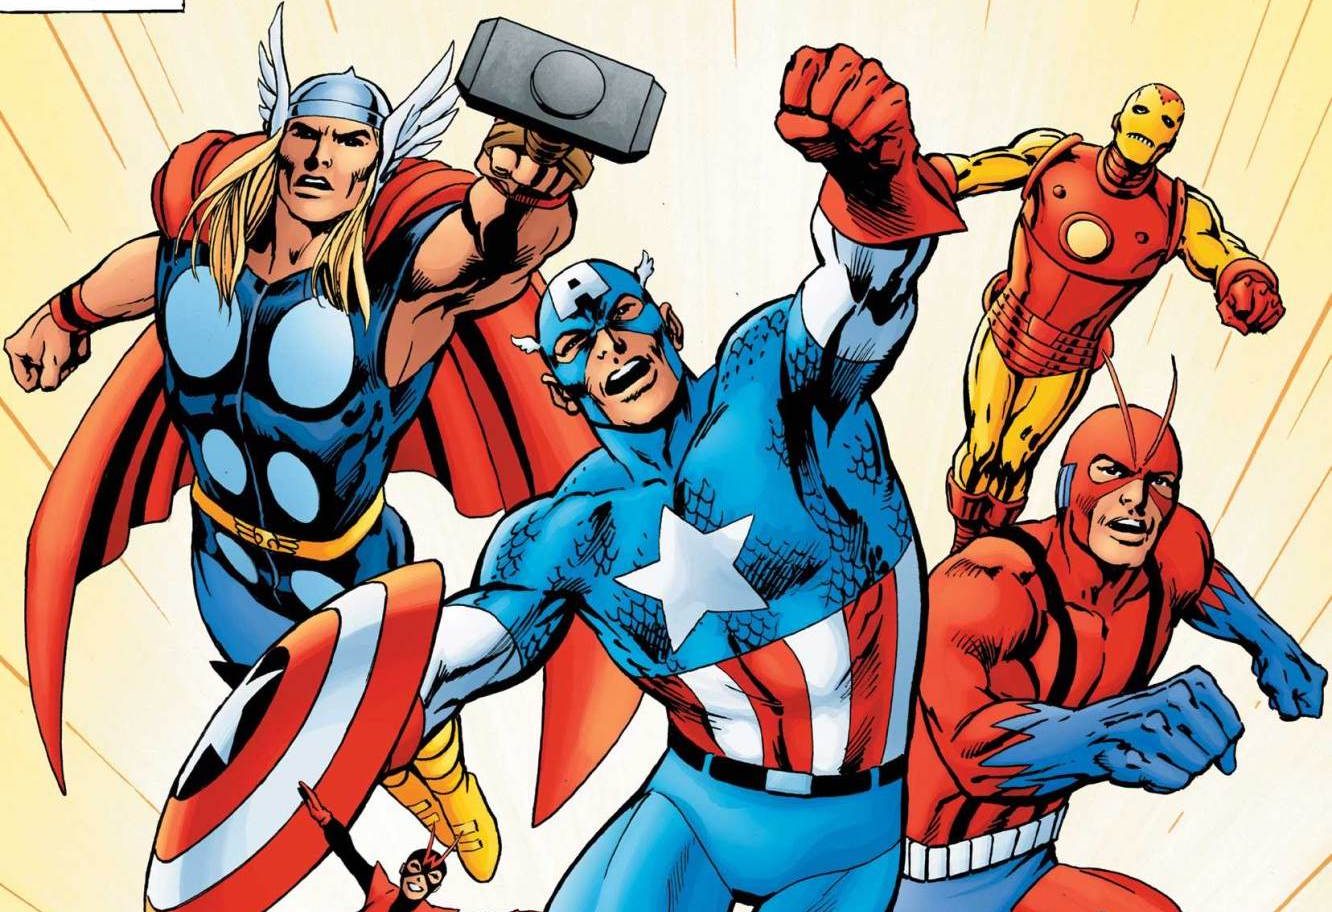 'The Avengers: War Across Time' #1 is a great start to a 60th anniversary celebration